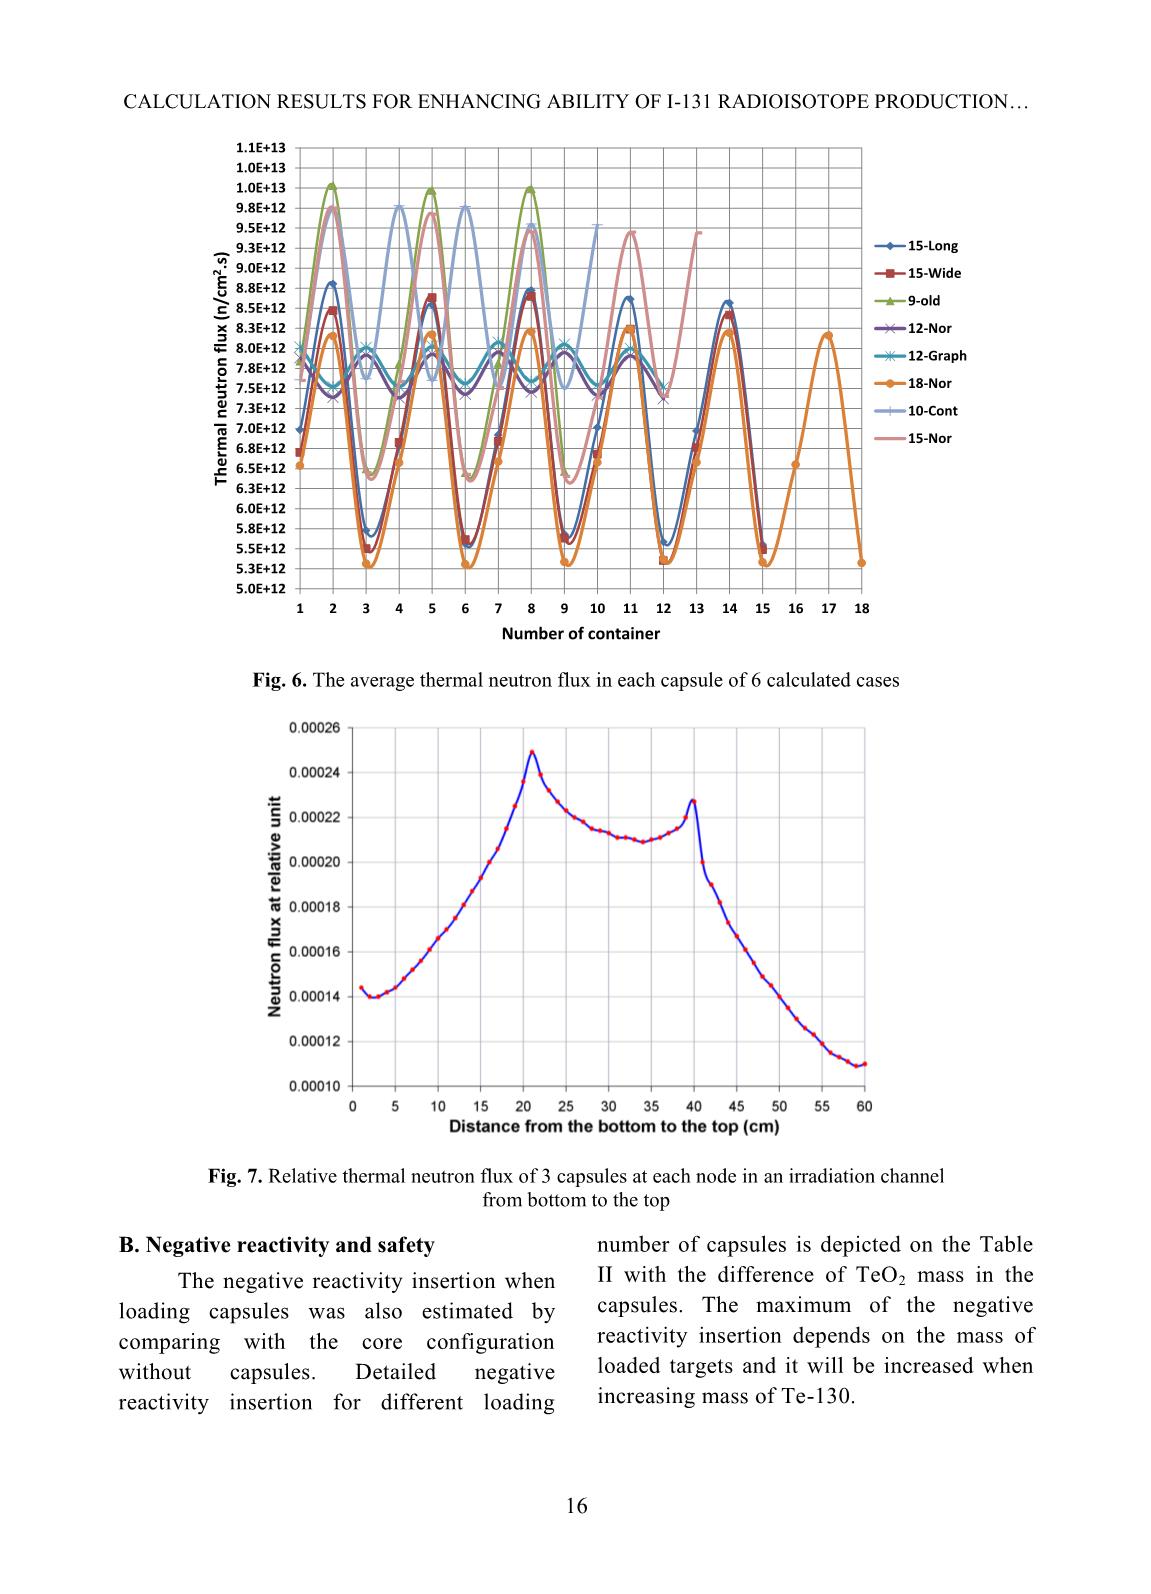 Calculation results for enhancing ability of I-131 radioisotope production using tellurium dioxide target on the dalat nuclear research reactor trang 8